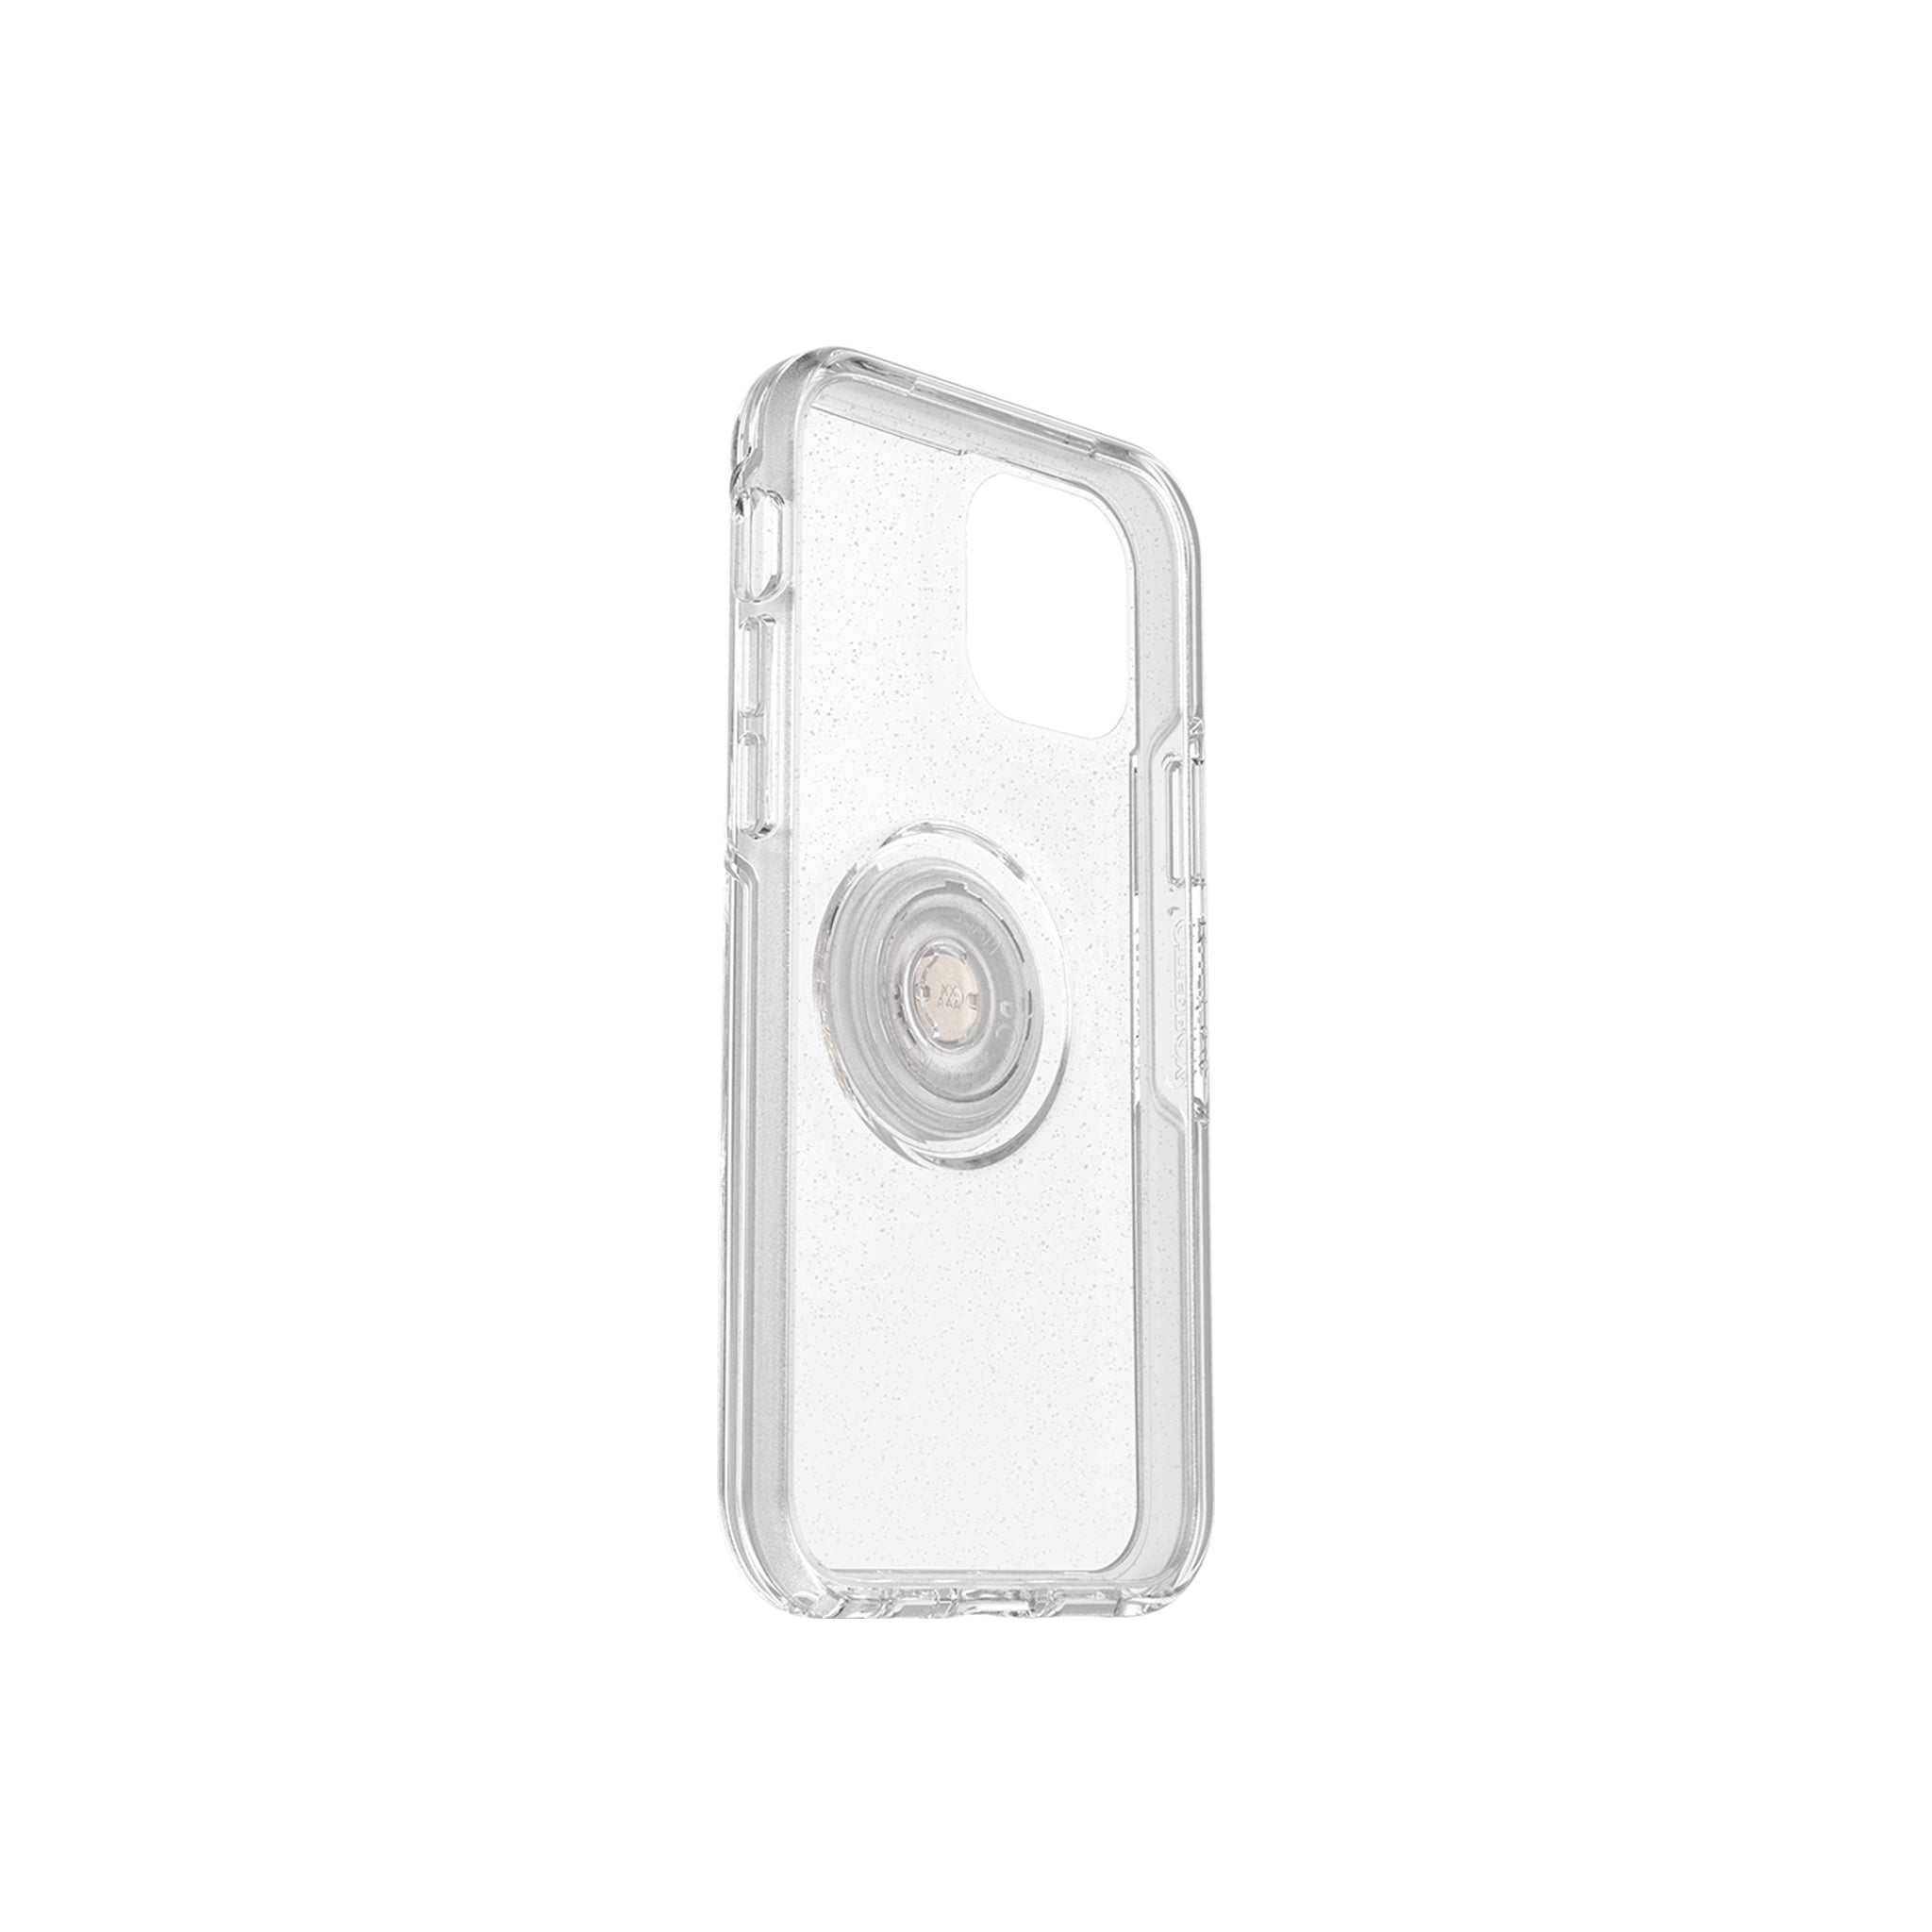 OtterBox - Otter + Pop Symmetry Clear for iPhone 12 / 12 Pro - Stardust Pop